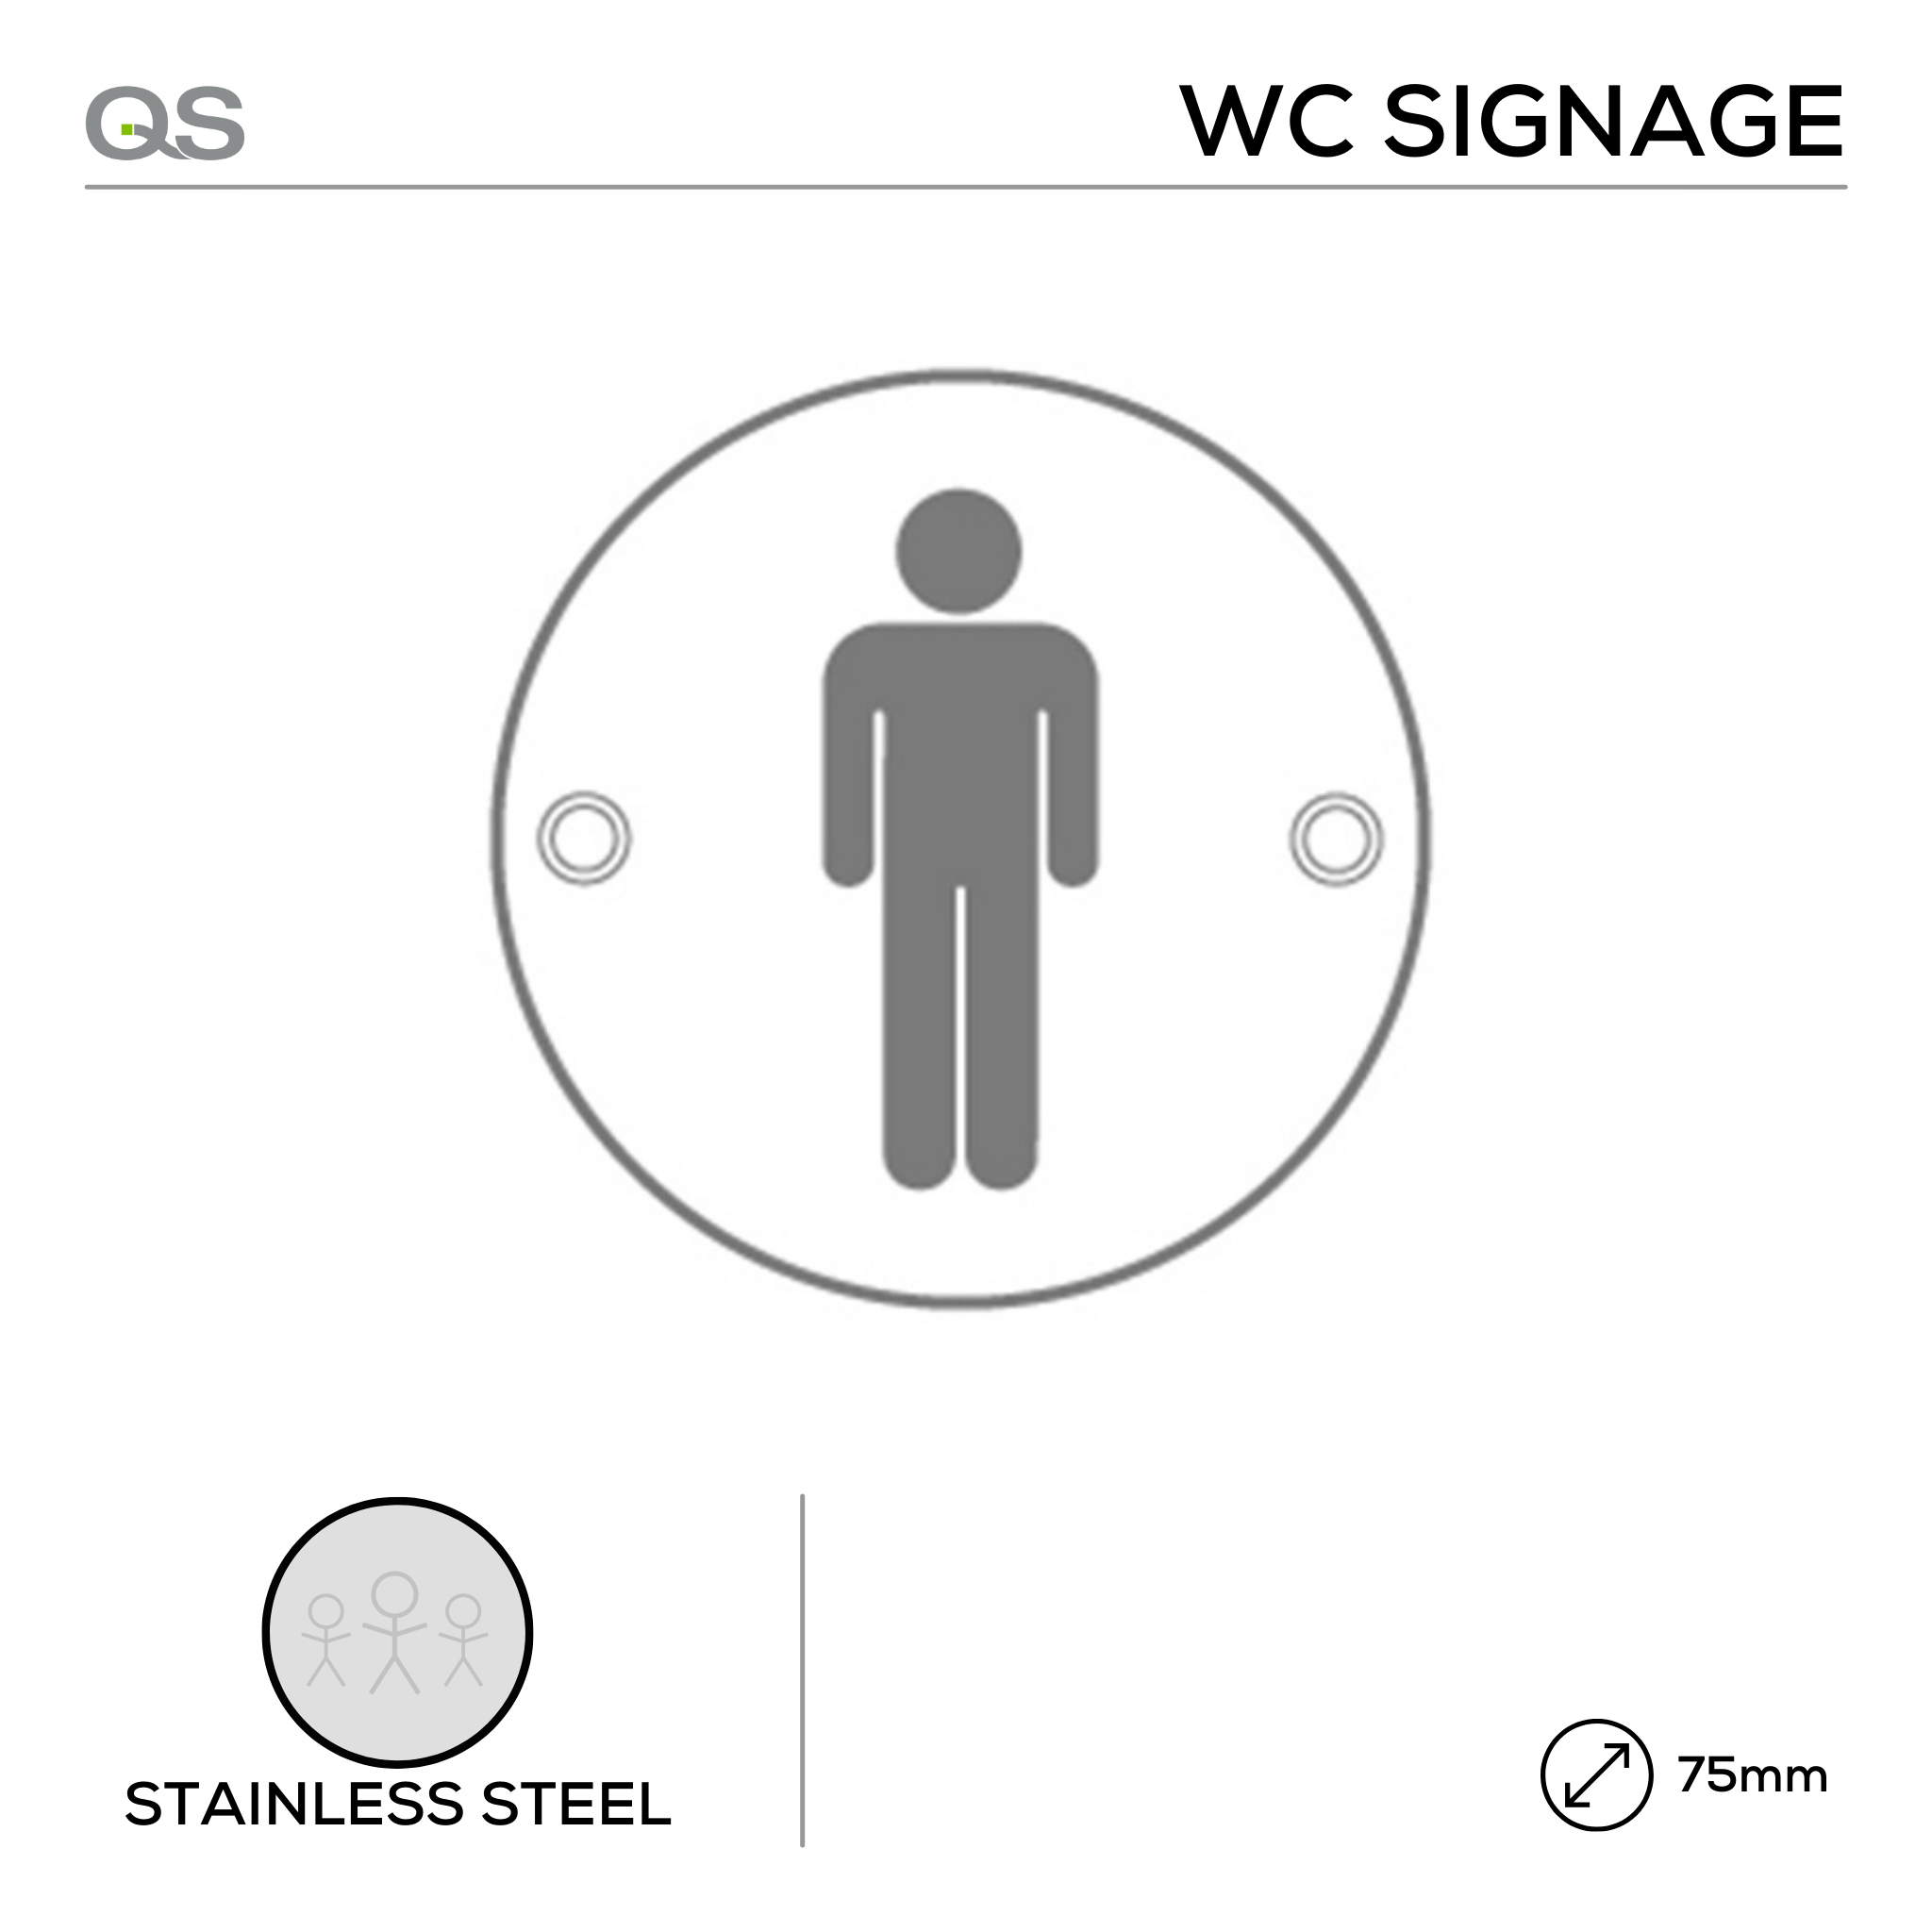 QS4501, Male, Round Engraved Sign, 75mm x 75mm, Stainless Steel, QS